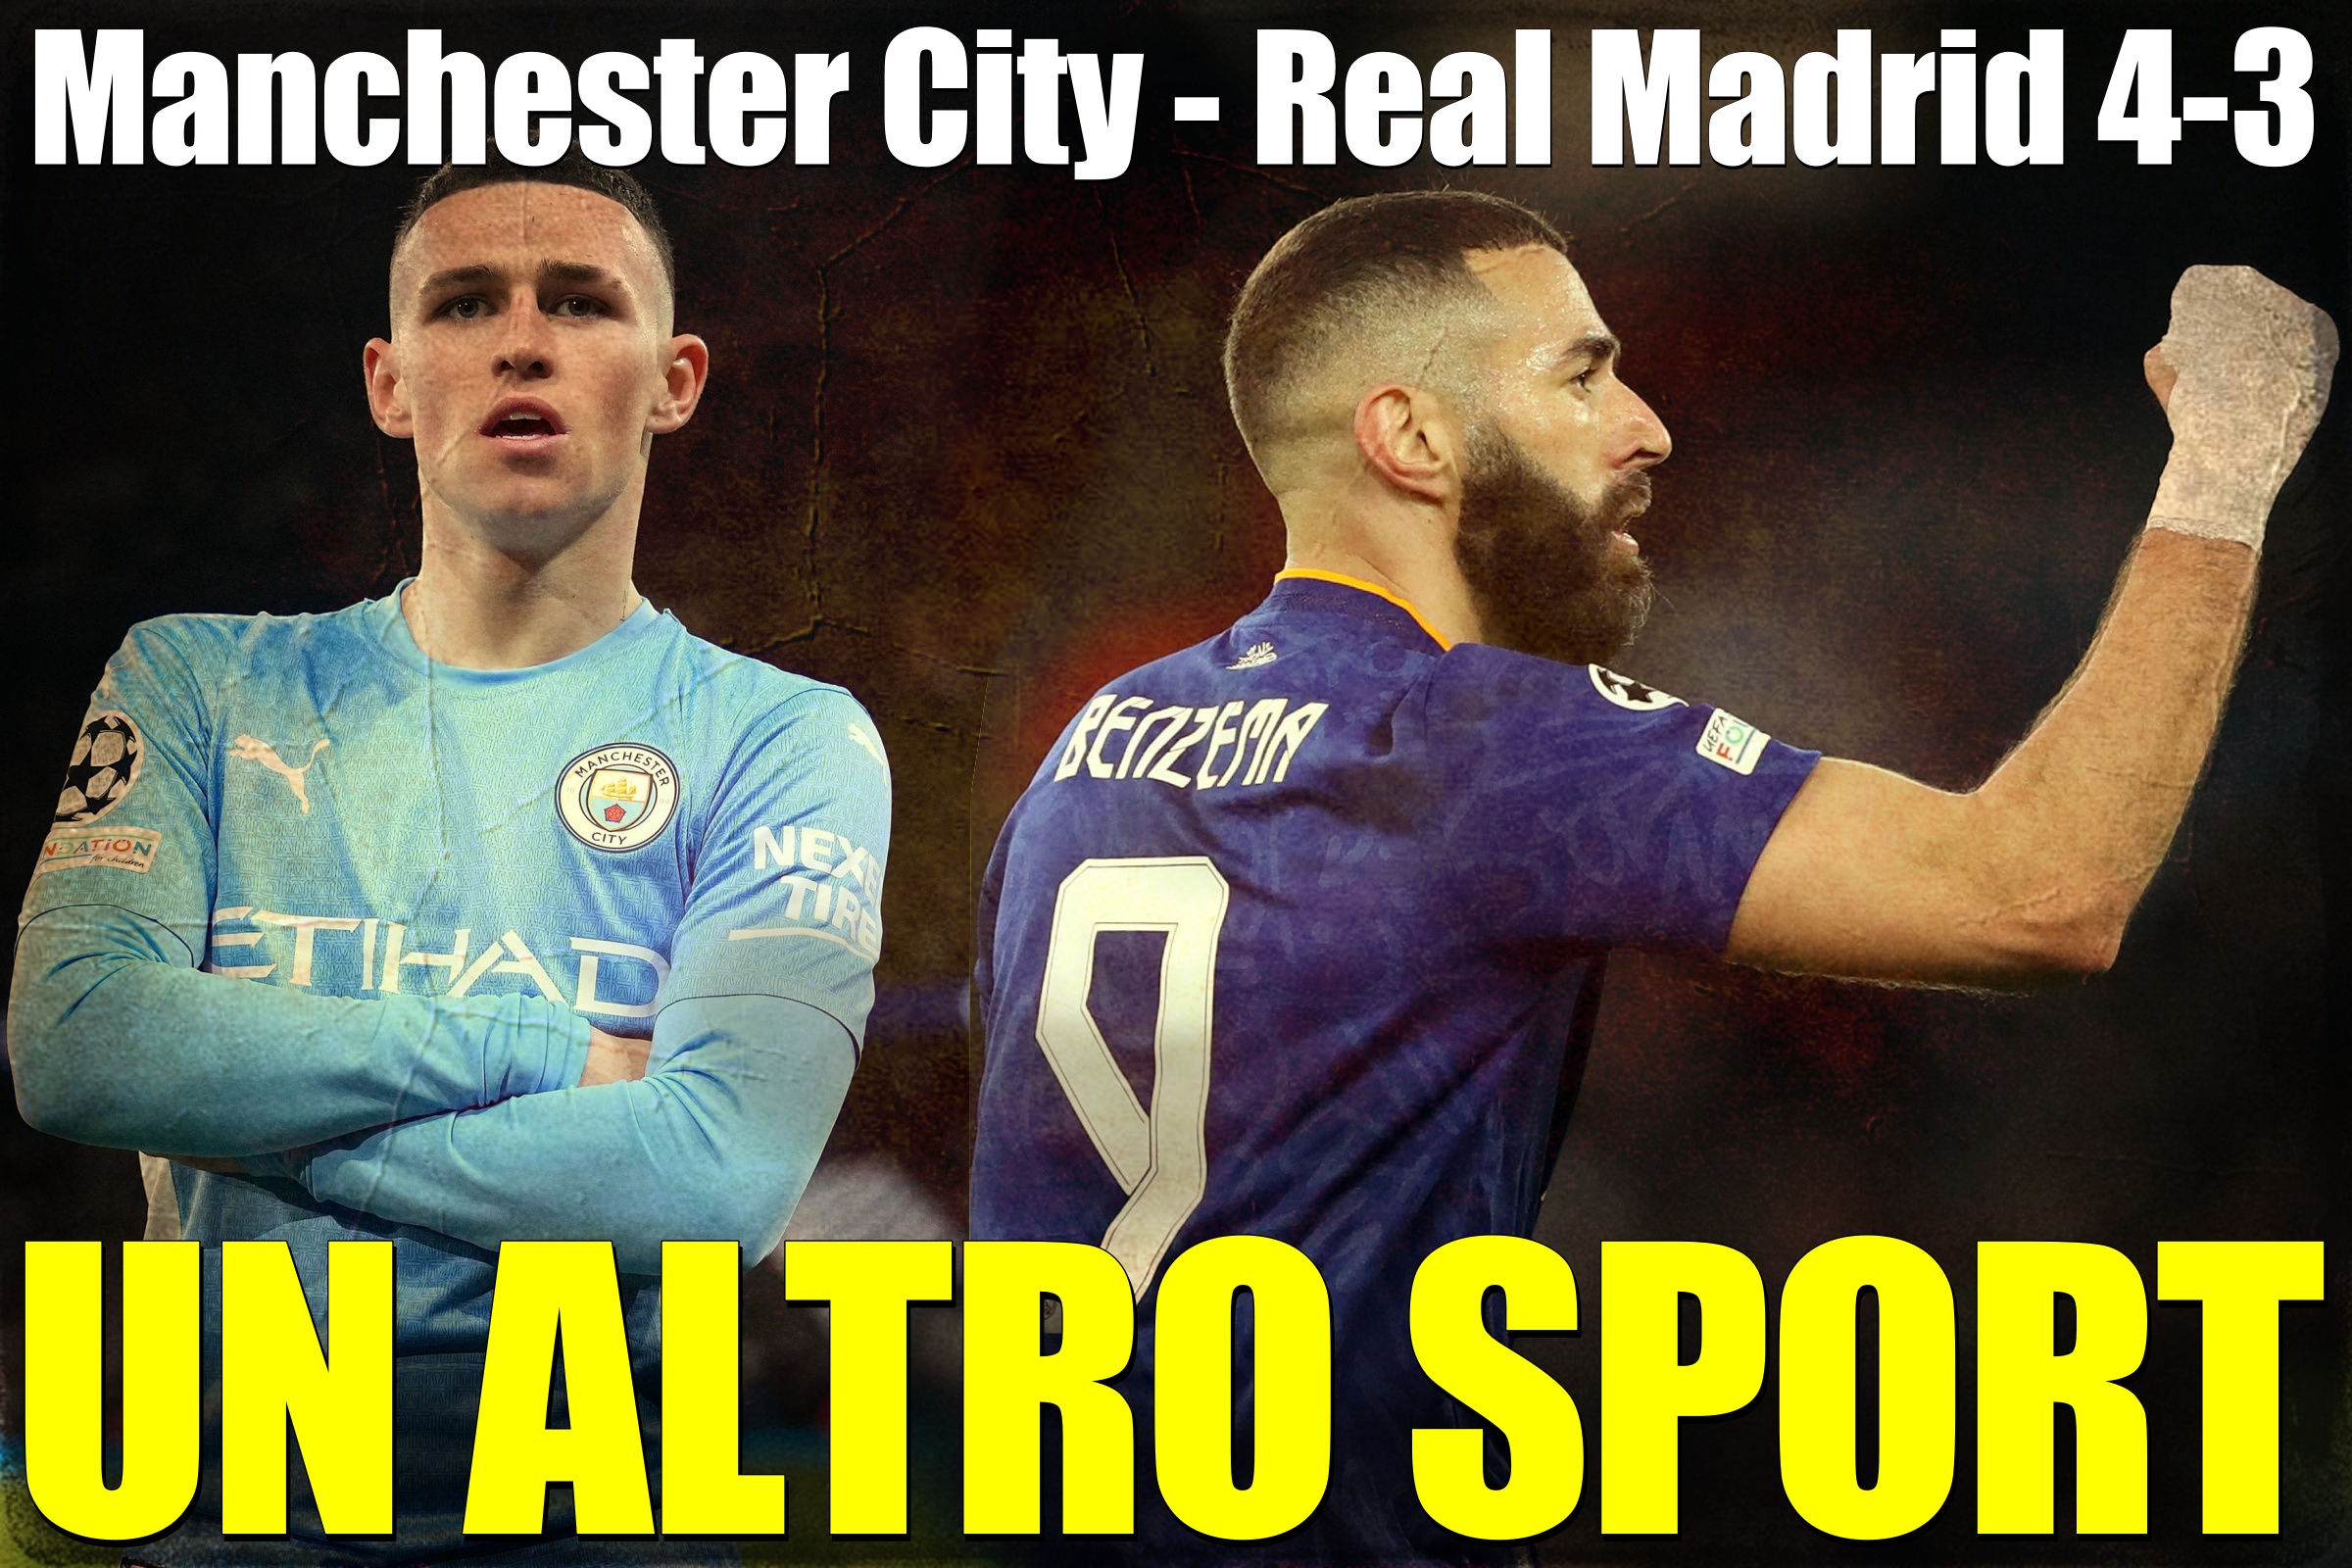 Champions League, Manchester City - Real Madrid 43